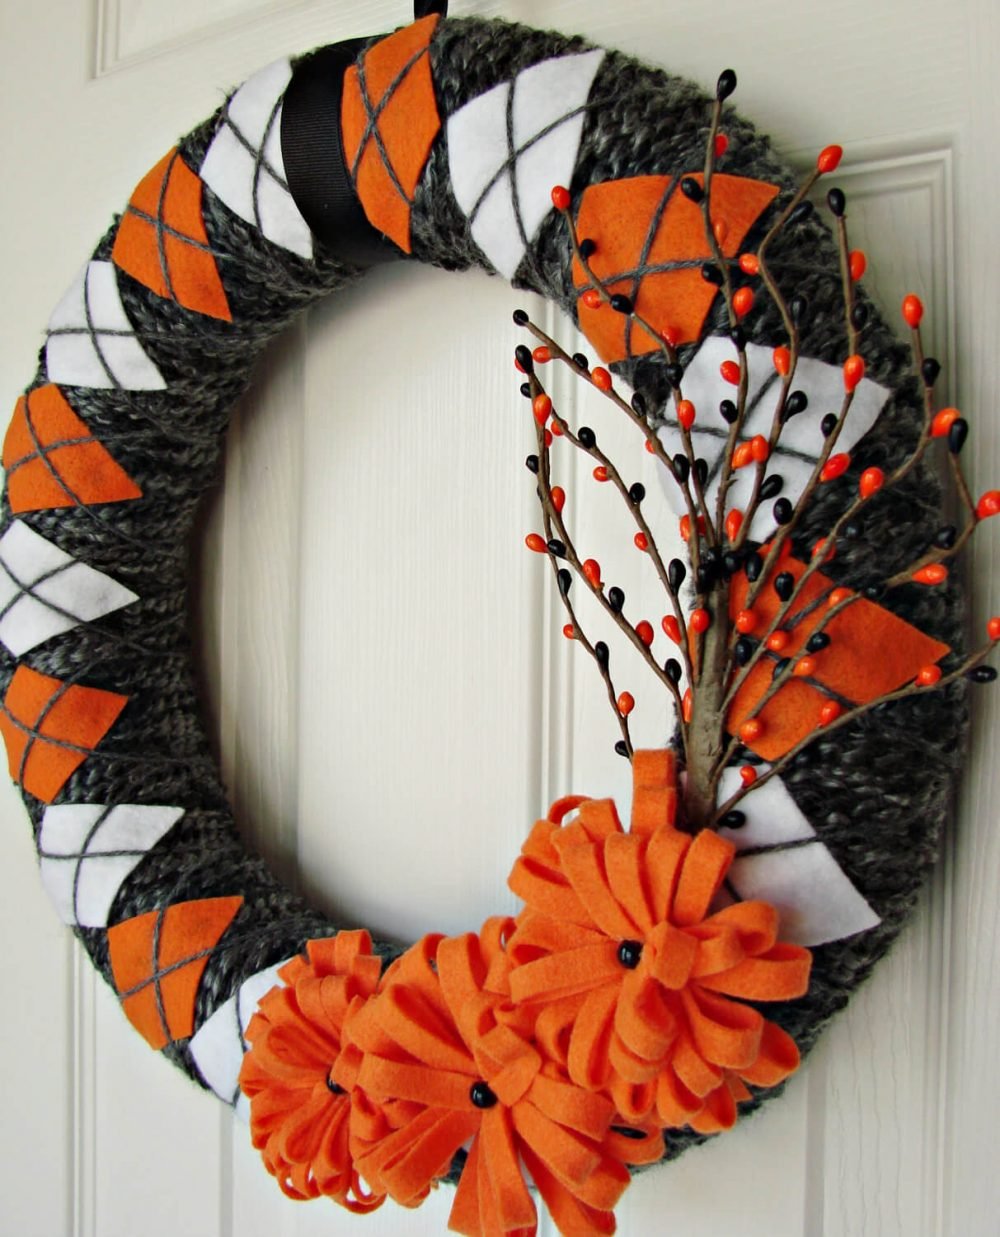 A wreath with orange and white flowers hanging on a door
